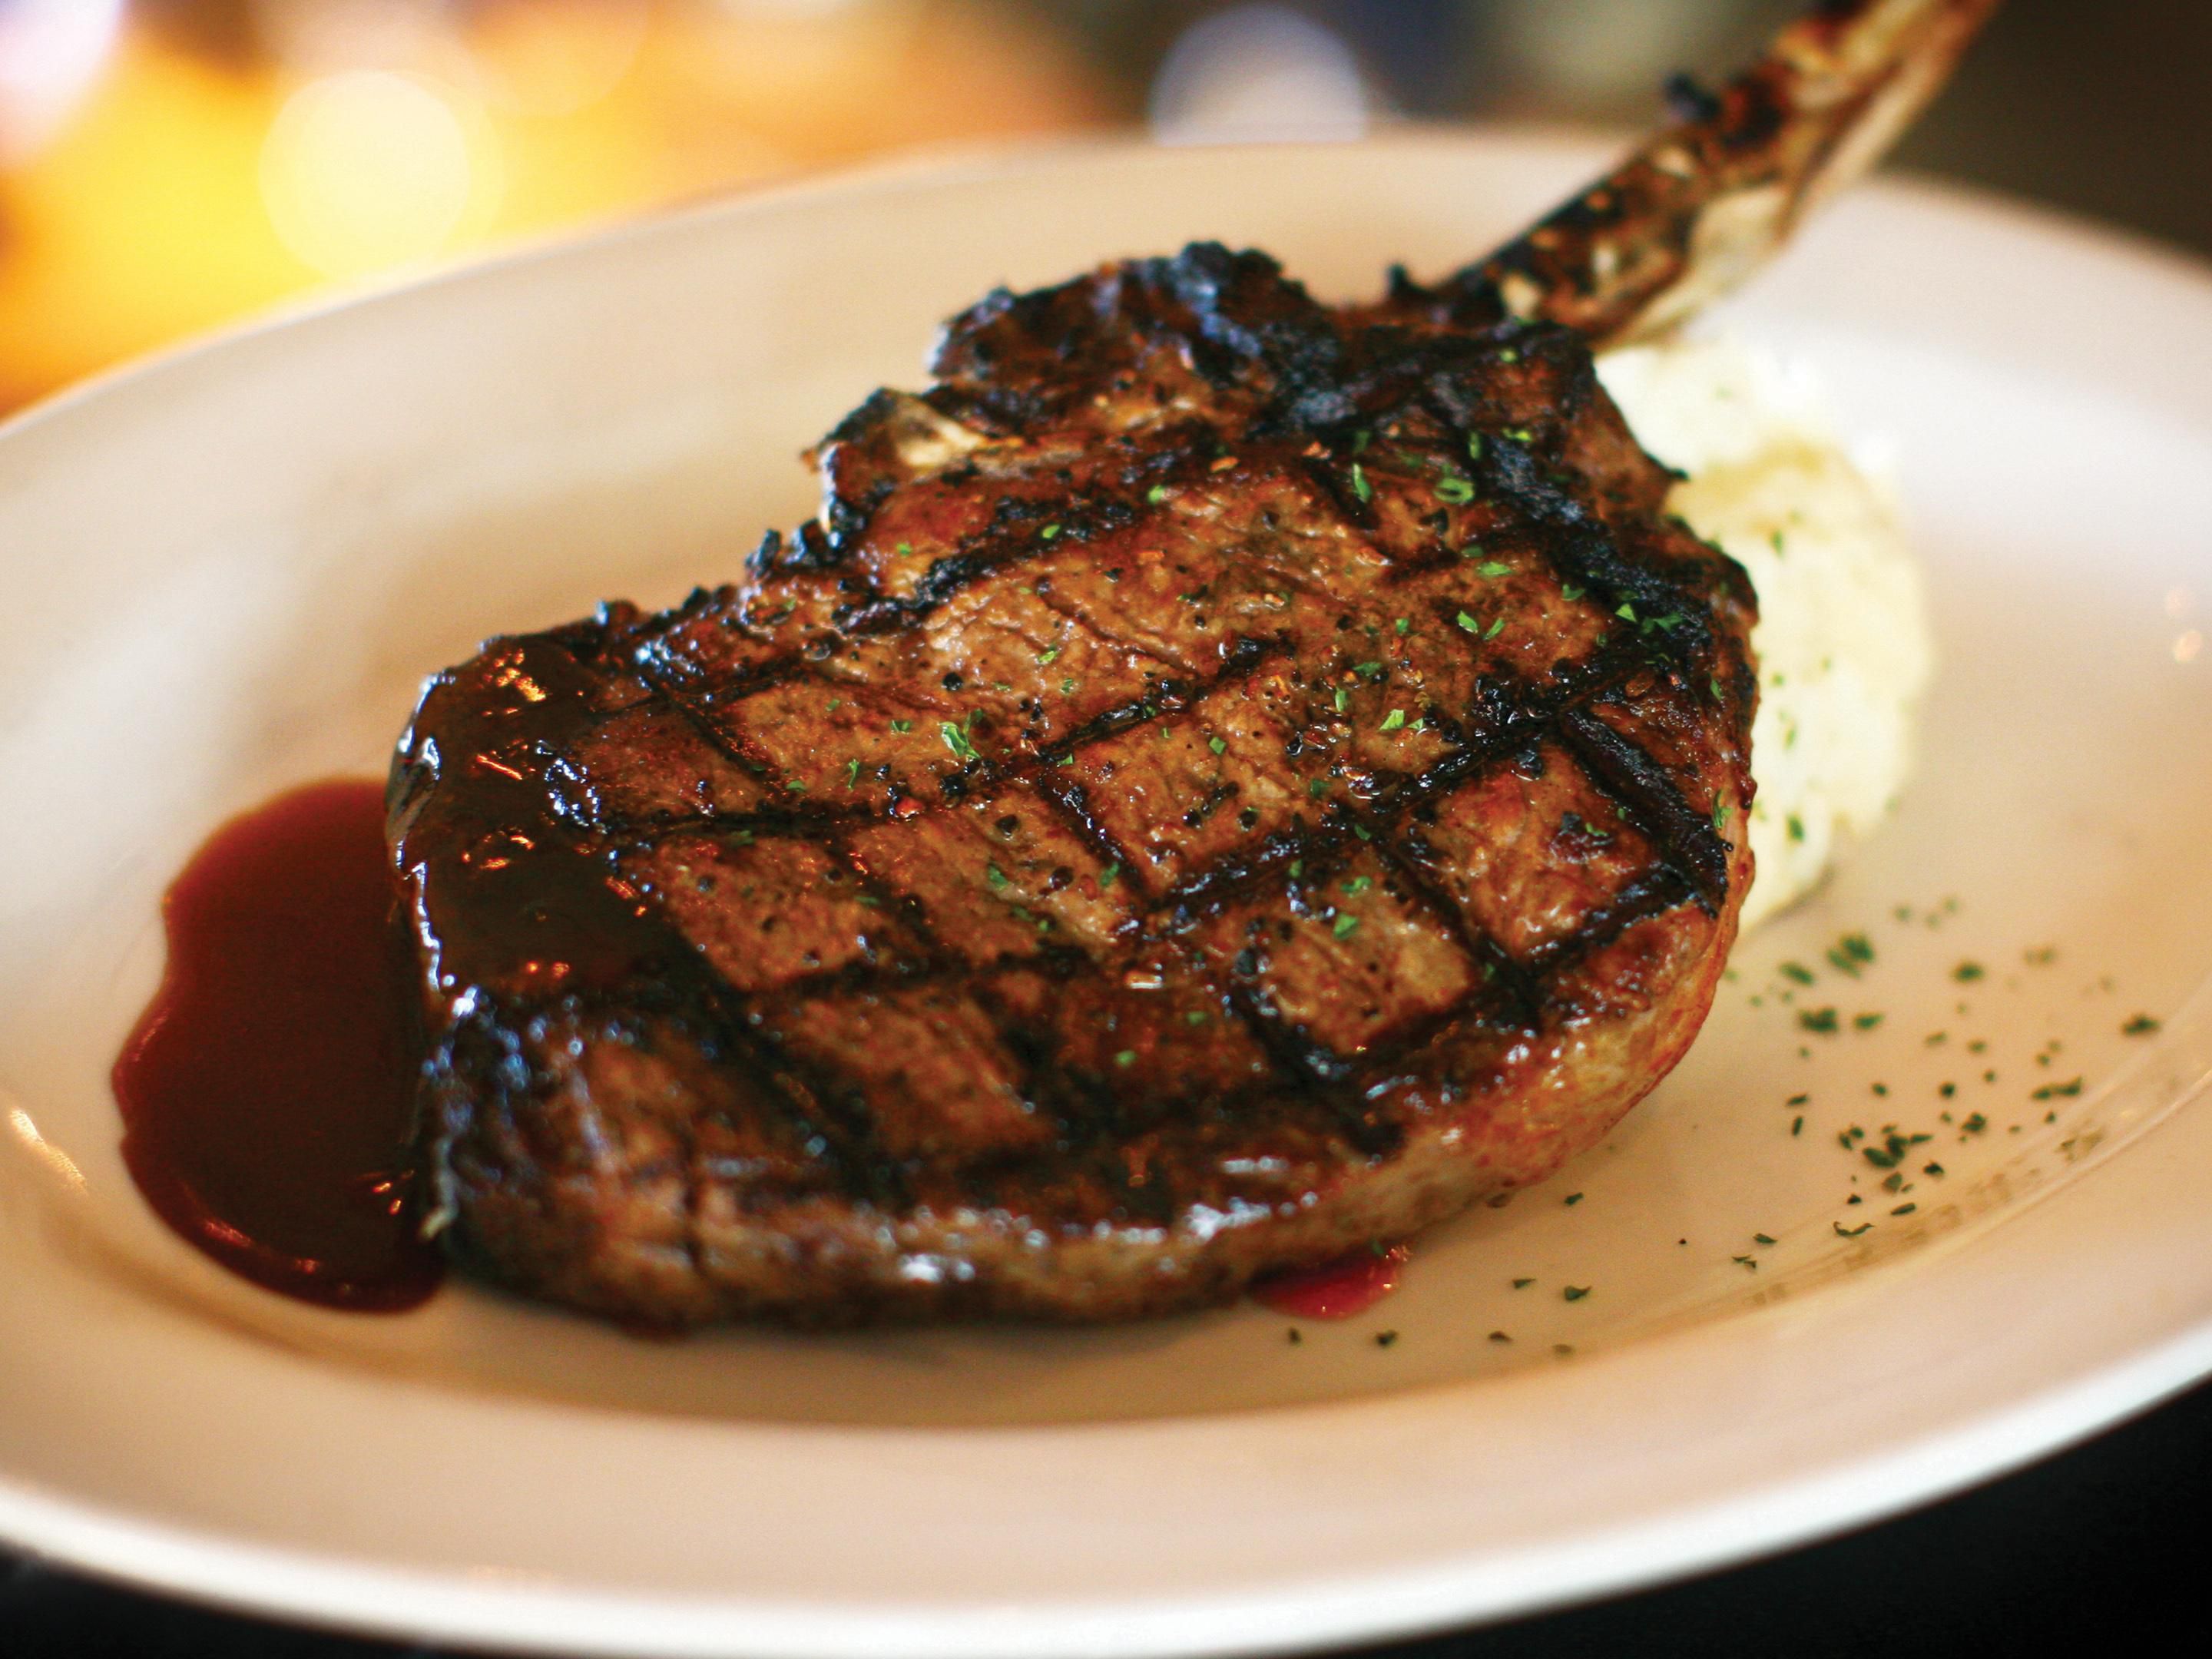 Boasting a mouth-watering assortment of perfectly-aged hand-cut steaks, delectable Italian dishes, and a curated wine list, celebrate with us! Click Learn More below for information on Johnny's Italian Steakhouse.